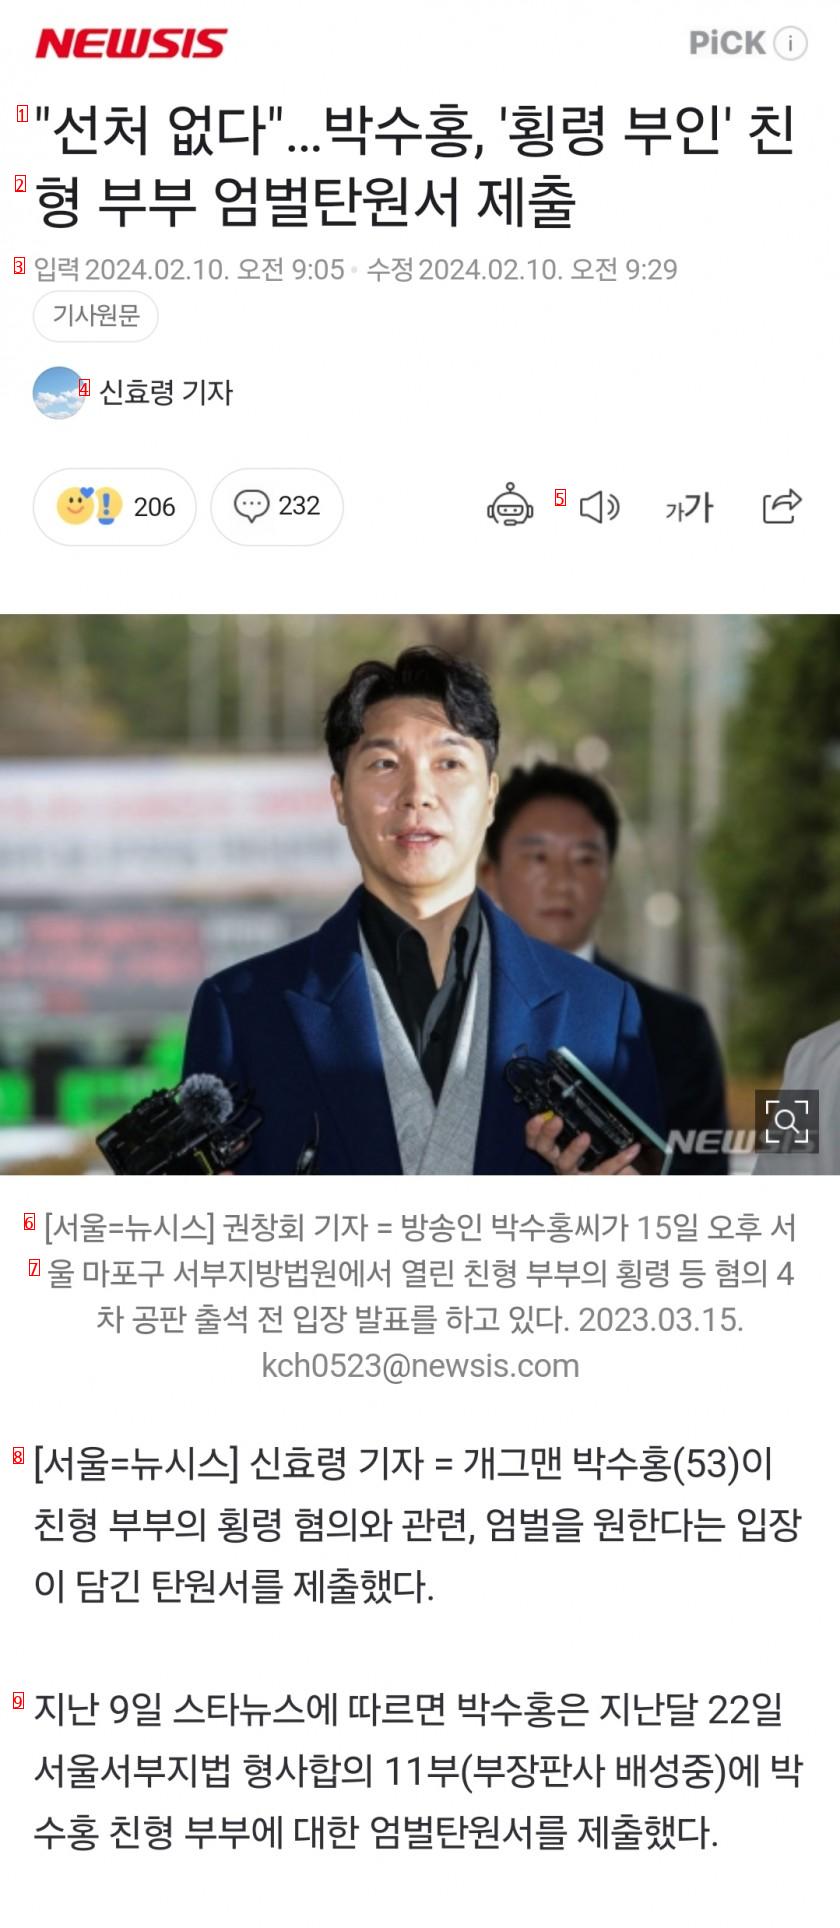 Park Soo-hong's embezzlement wife's brother and his wife submitted a petition for severe punishment